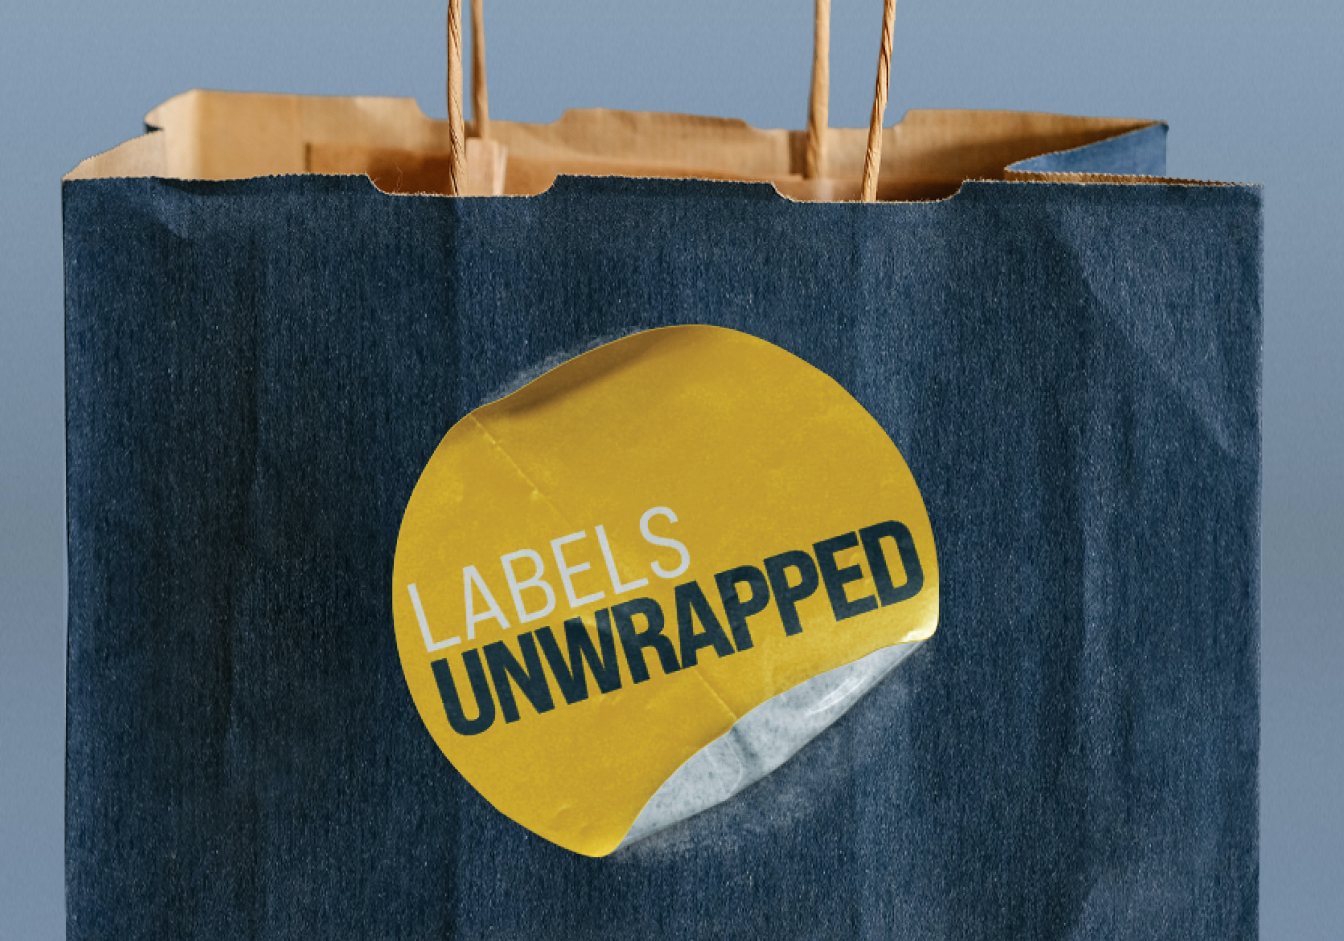 A paper bag with a sticker that says "Labels Unwrapped"